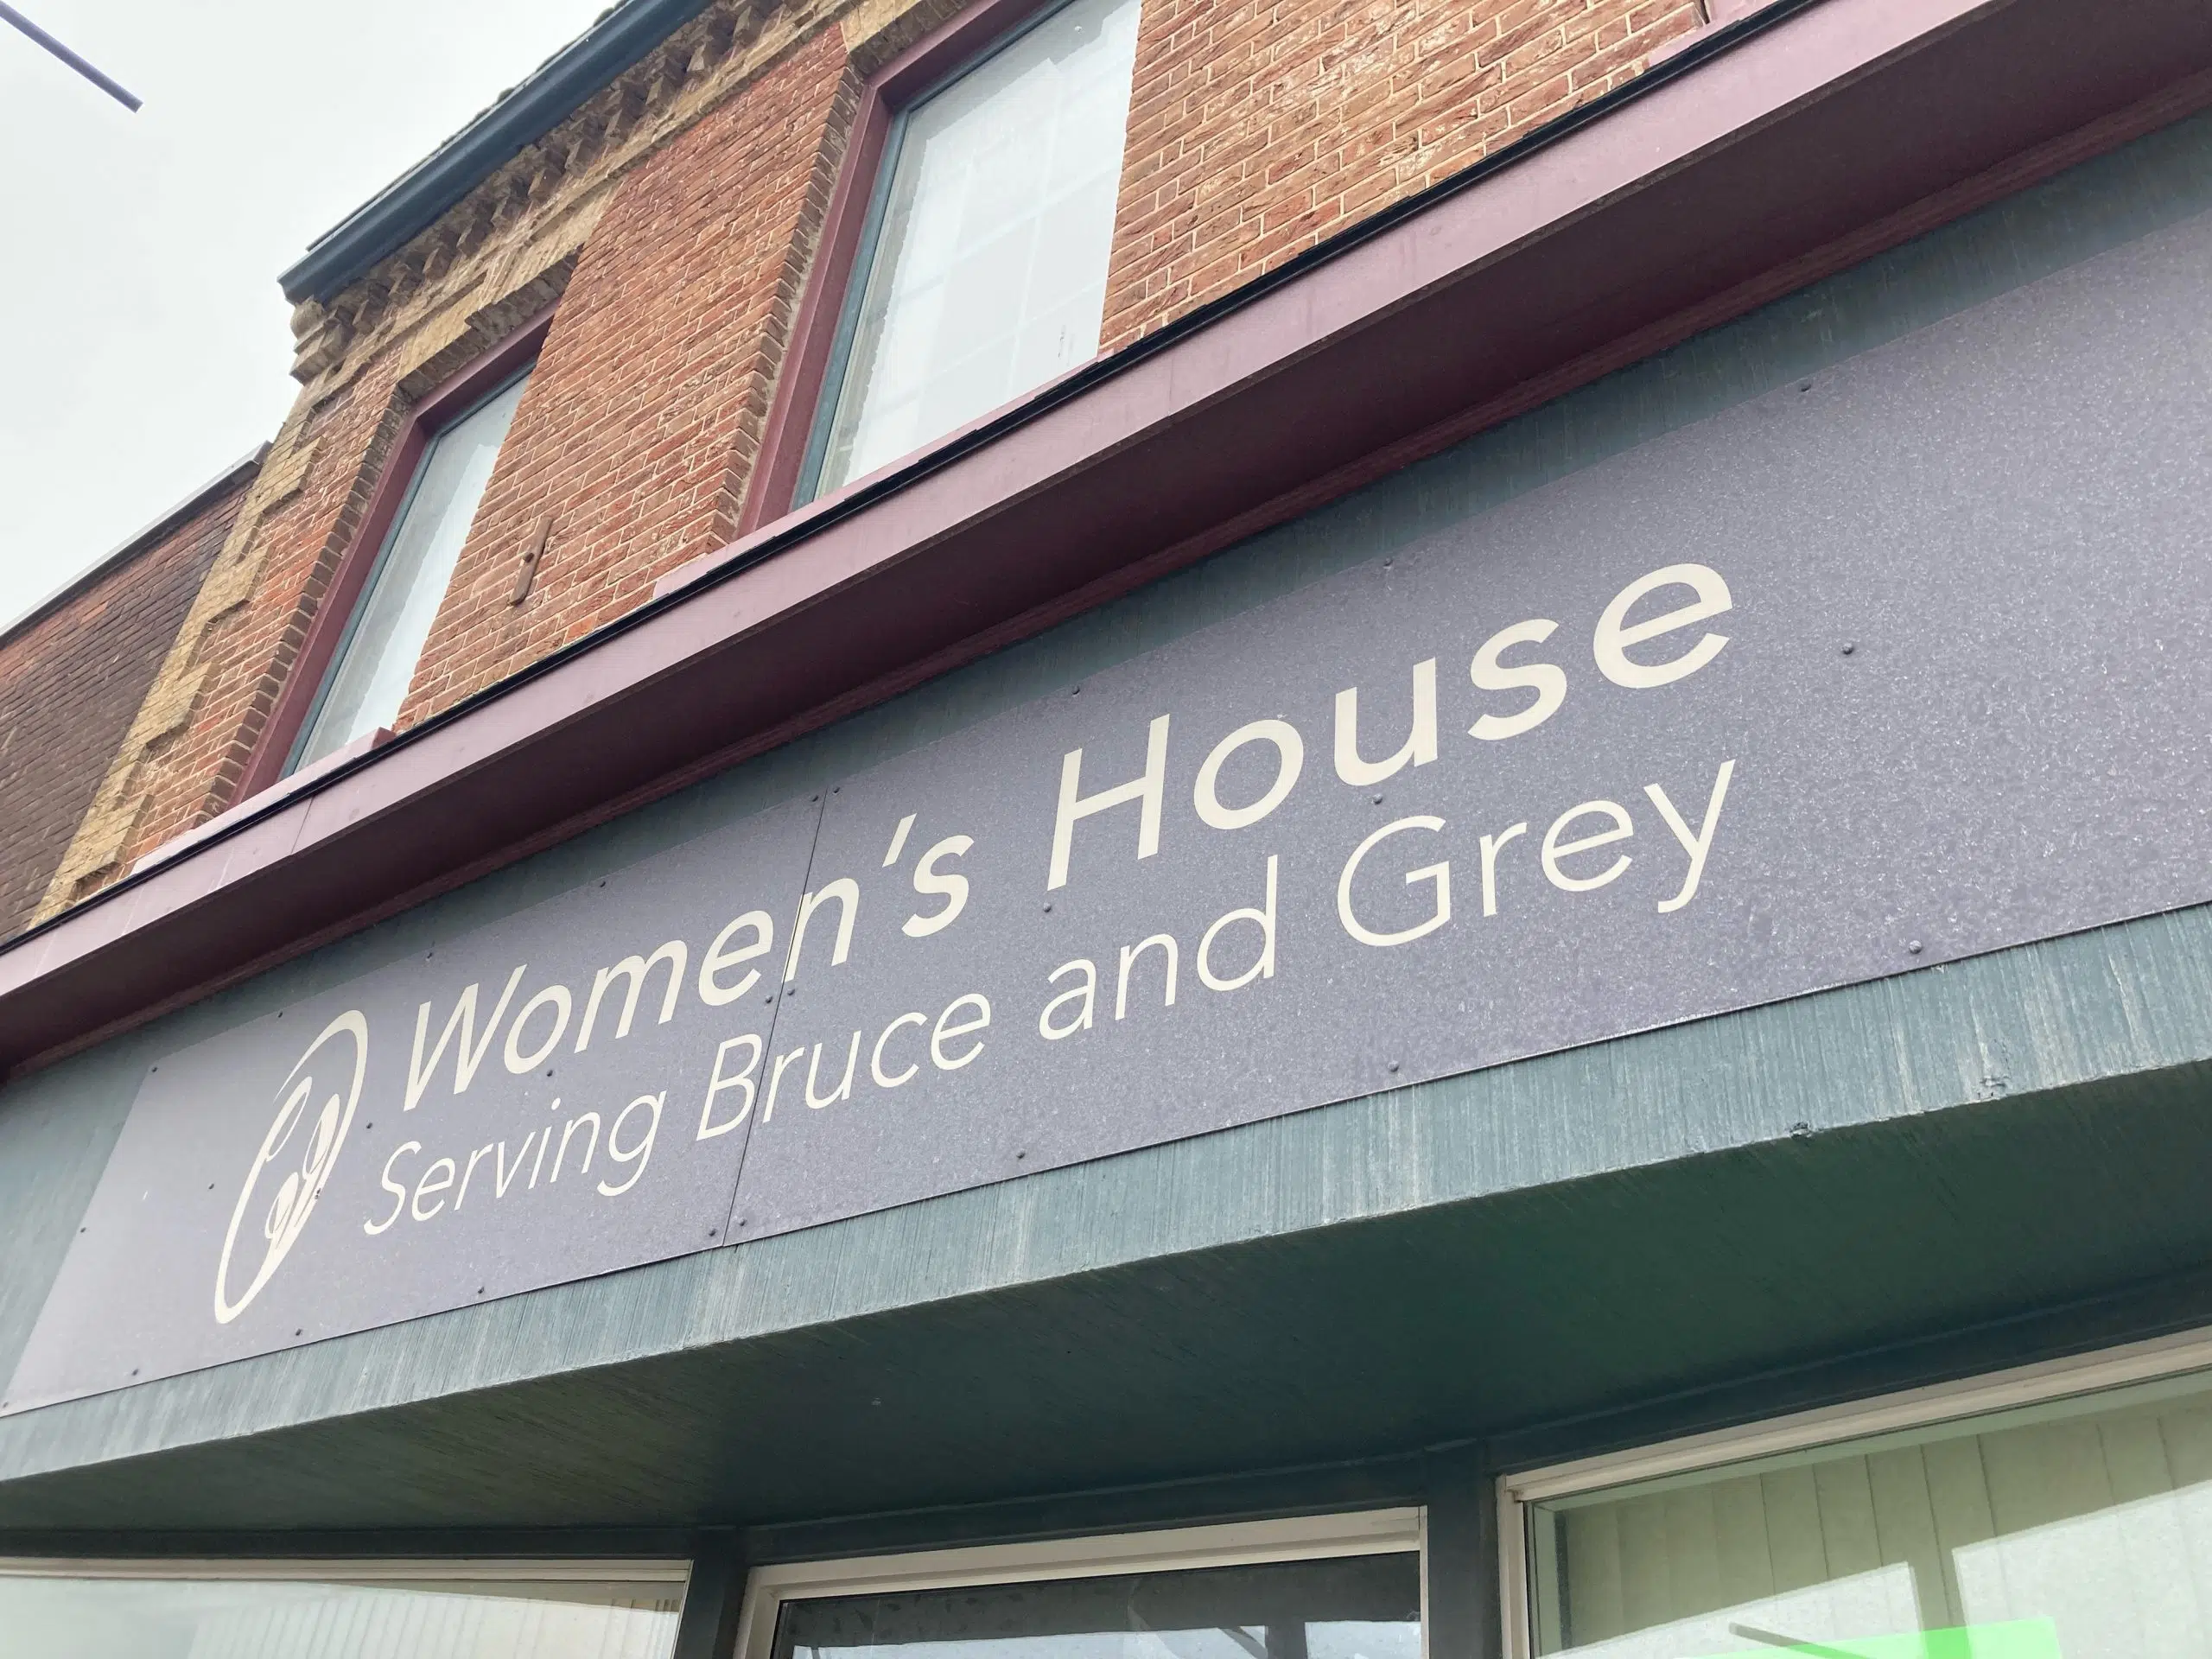 Women's House Serving Bruce, Grey Holds Annual Heeled Walk Event